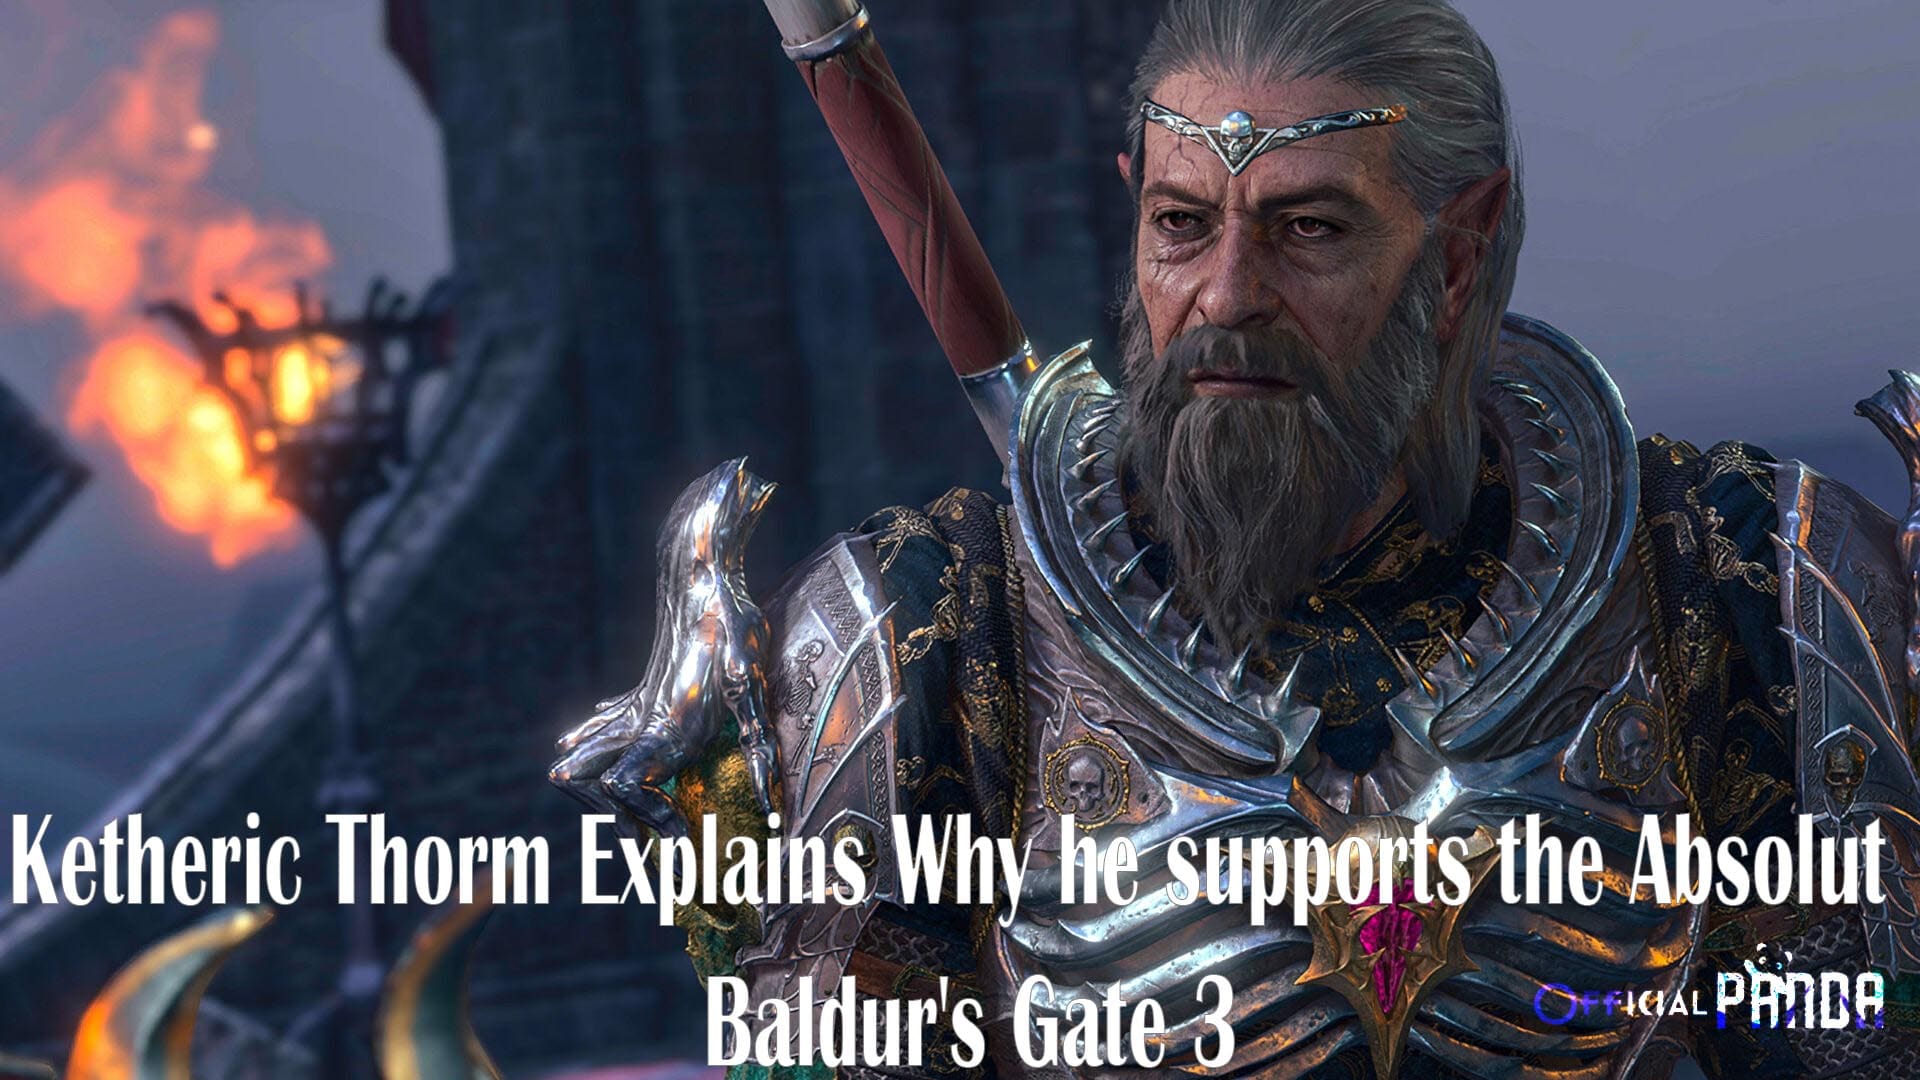 Ketheric Thorm Explains Why he supports the Absolut | Baldur's Gate 3